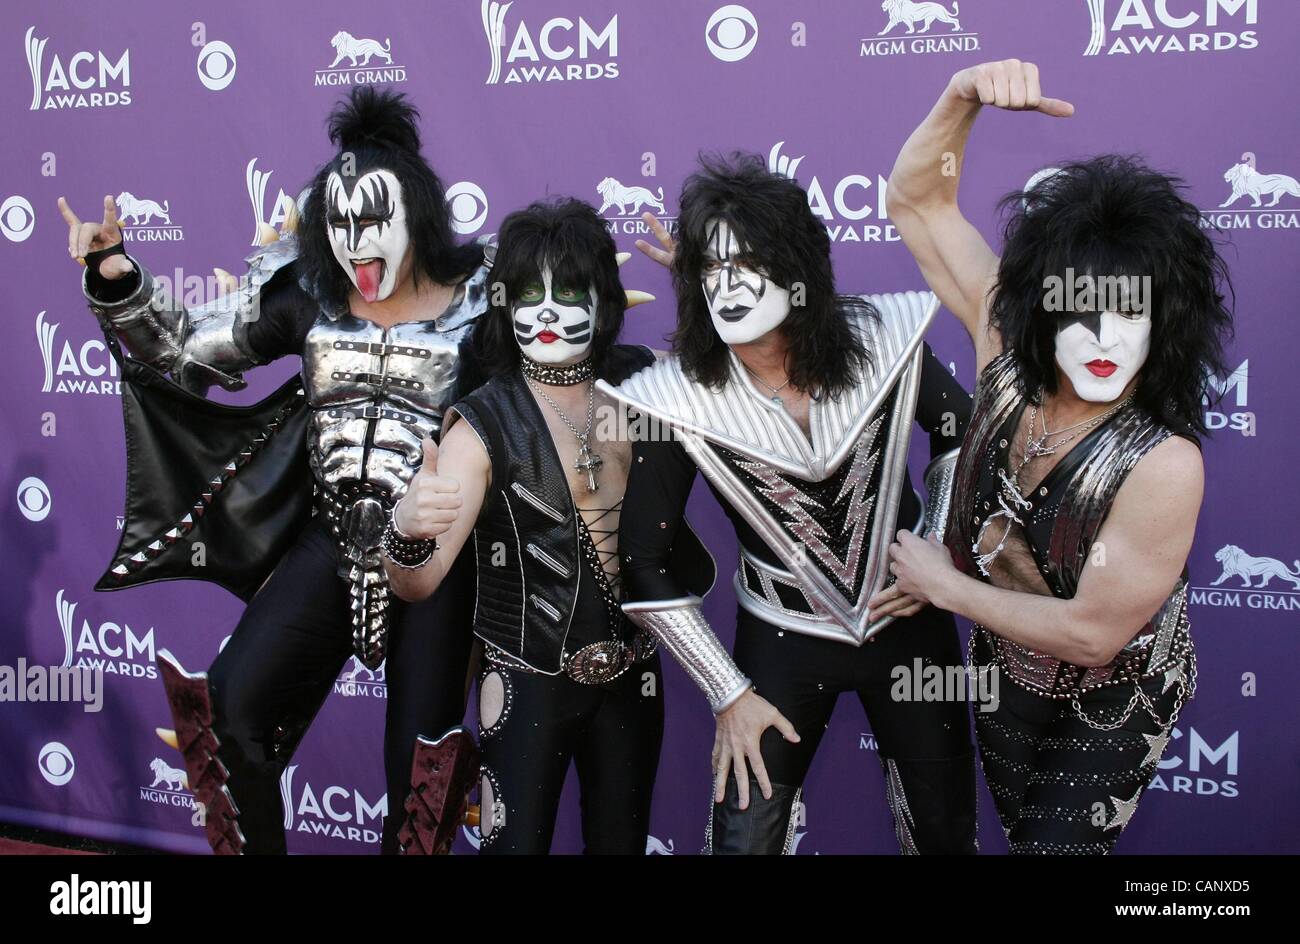 Gene Simmons, Eric Singer, Tommy Thayer, Paul Stanley of Kiss at arrivals for 47th Annual Academy of Country Music (ACM) Awards - ARRIVALS 2, MGM Grand Garden Arena, Las Vegas, NV April 1, 2012. Photo By: James Atoa/Everett Collection Stock Photo